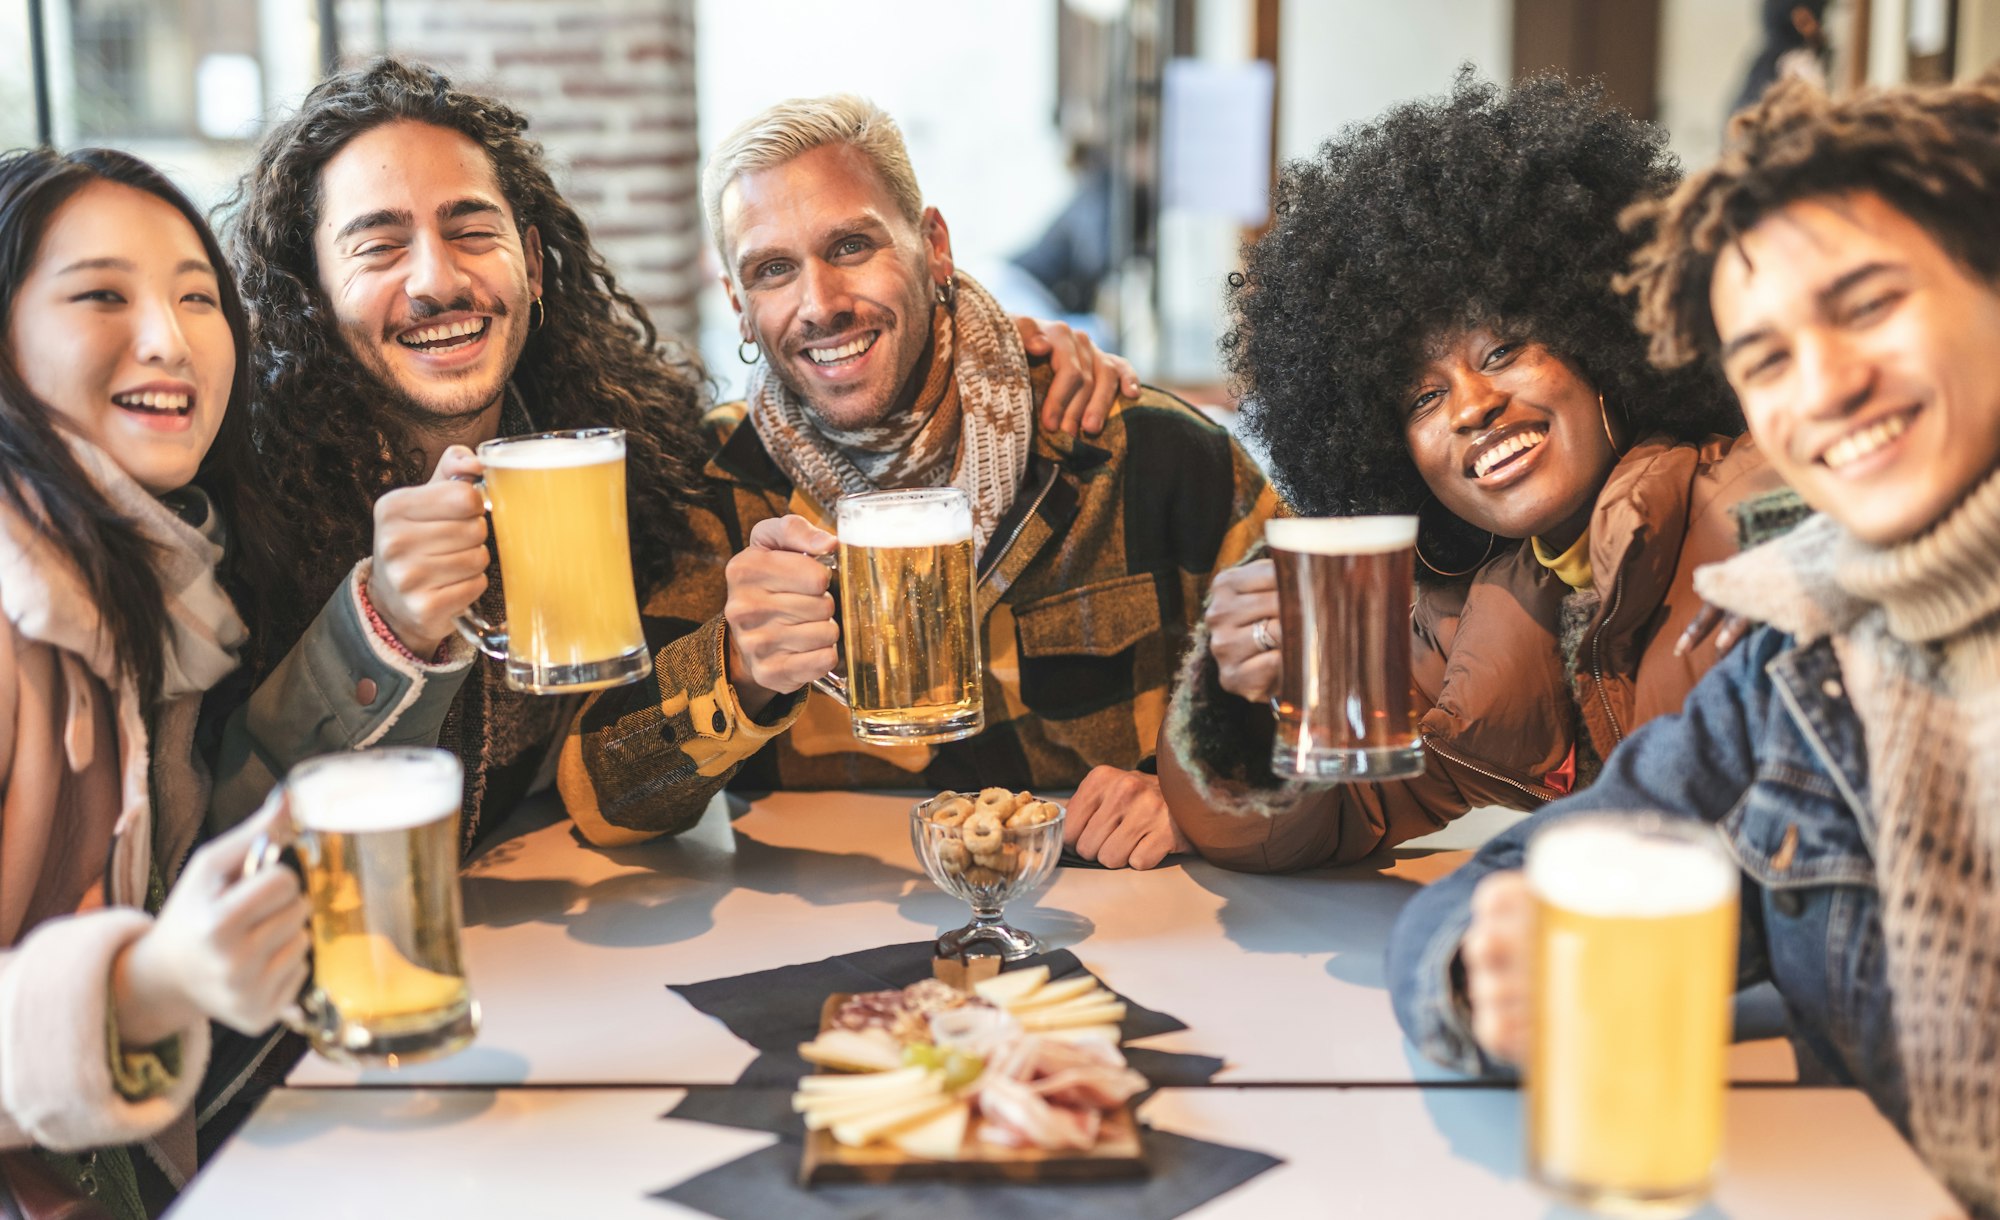 Event Experiences / A group of multiracial friends raise their beer mugs in celebration at a pub event.